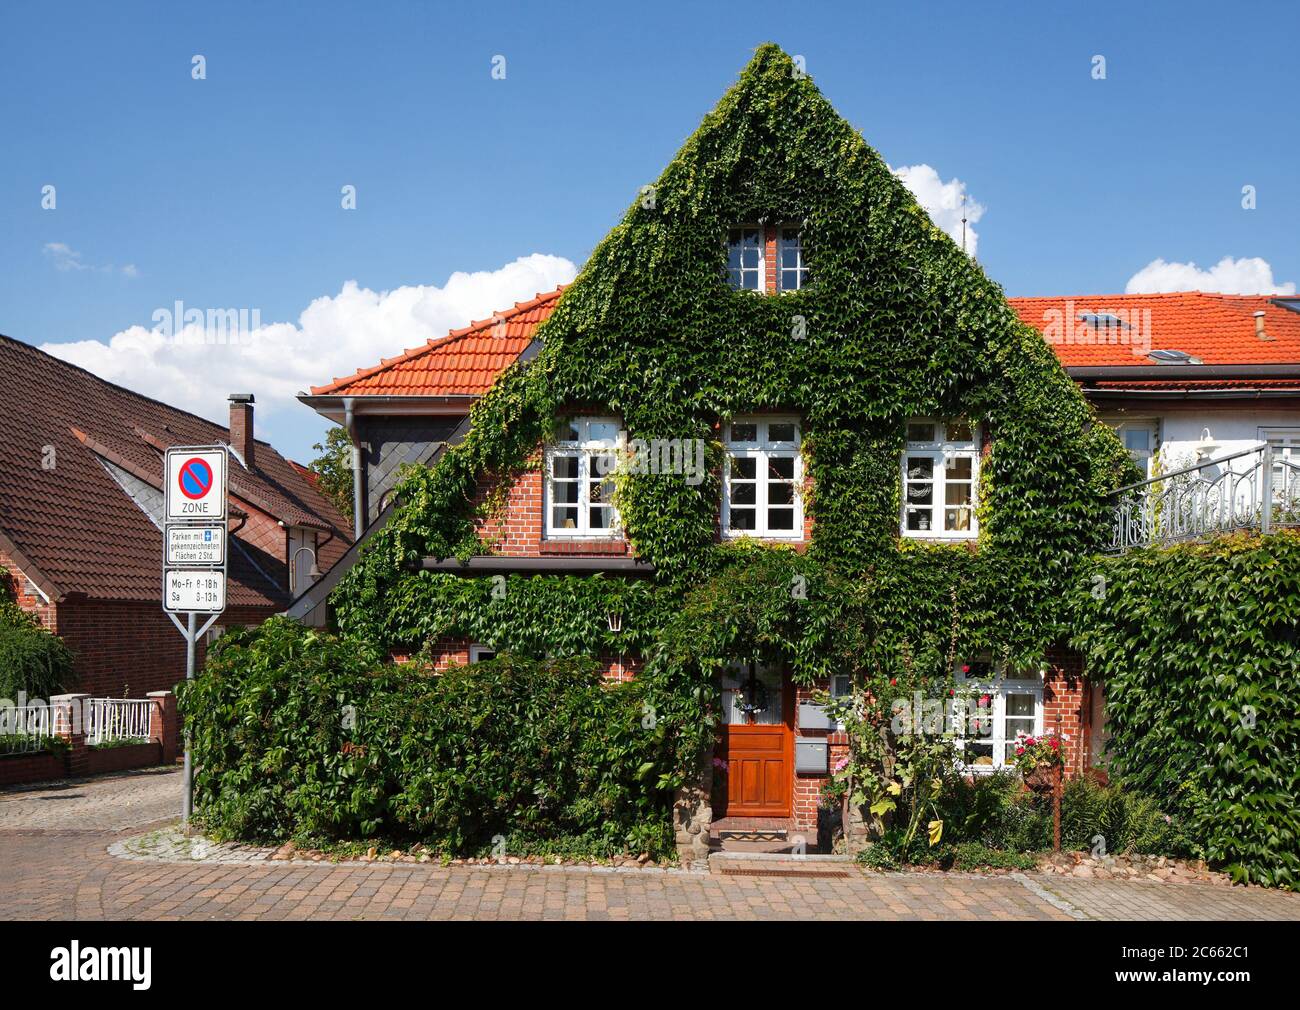 Old half-timbered house overgrown with ivy in Vilsen, Bruchhausen-Vilsen, Lower Saxony, Germany, Europe Stock Photo